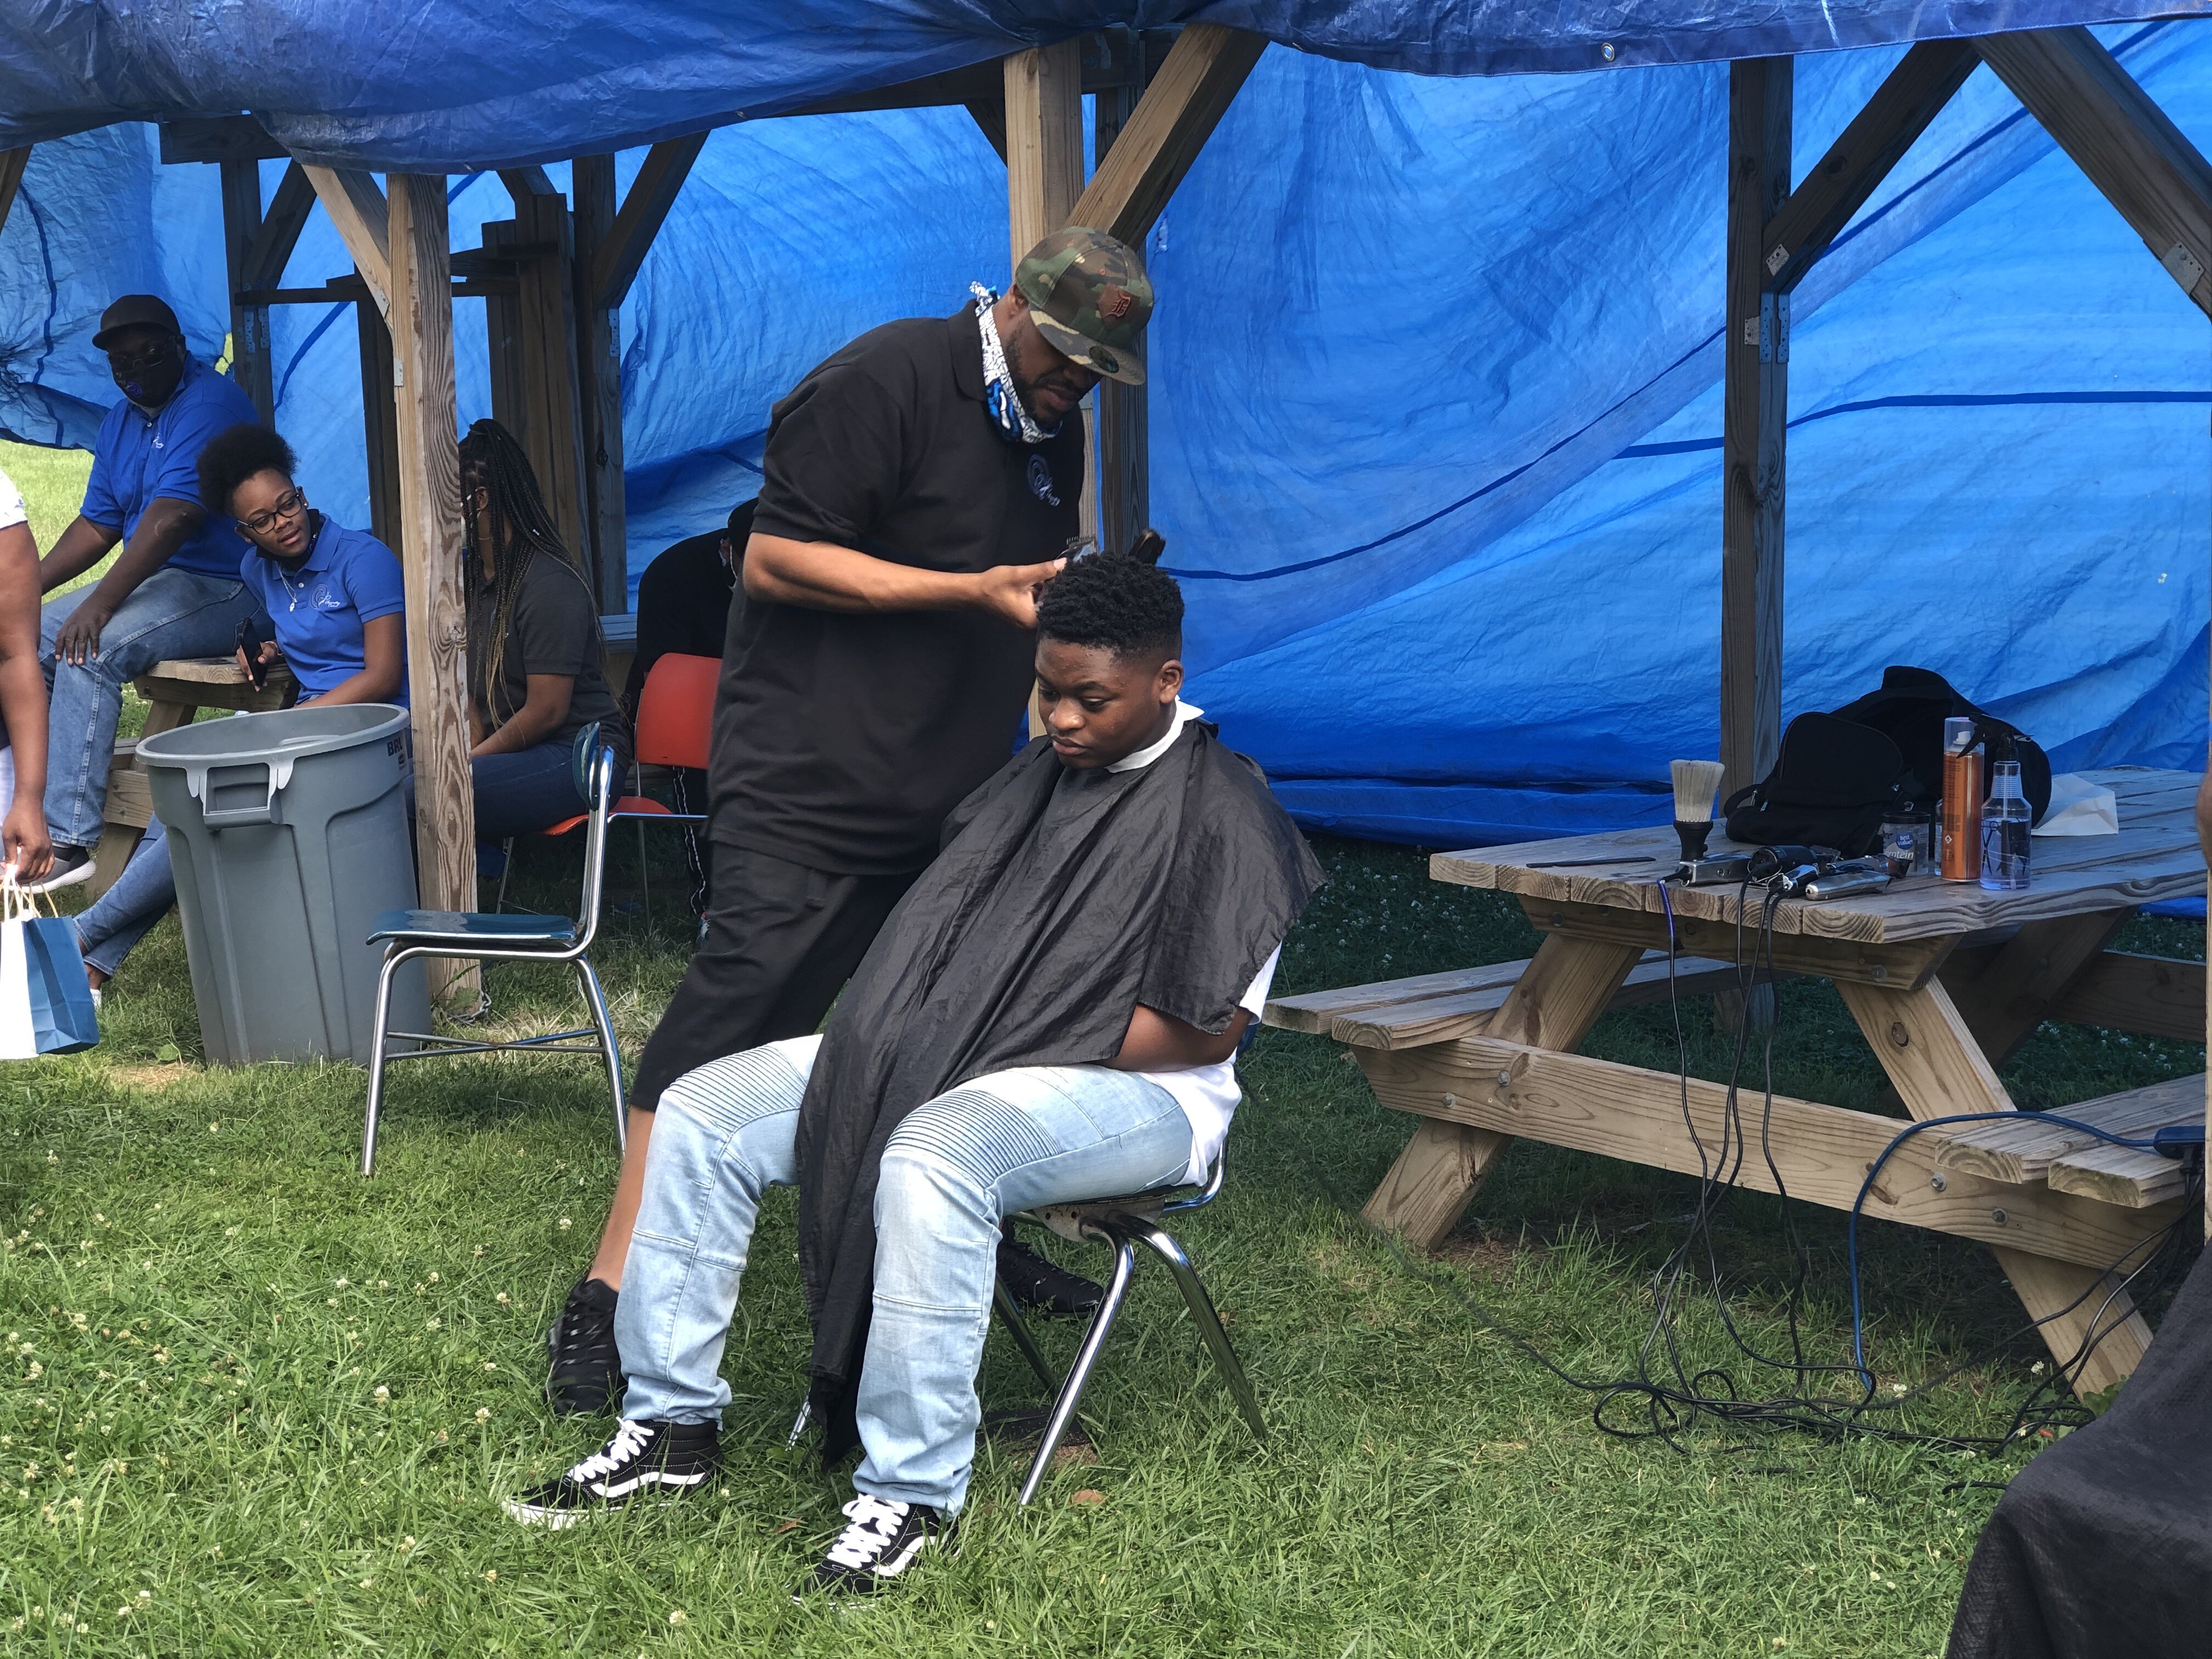 Roy Nichols, founder of Charity C.U.T.S. finished up a haircut at Berston Fieldhouse.